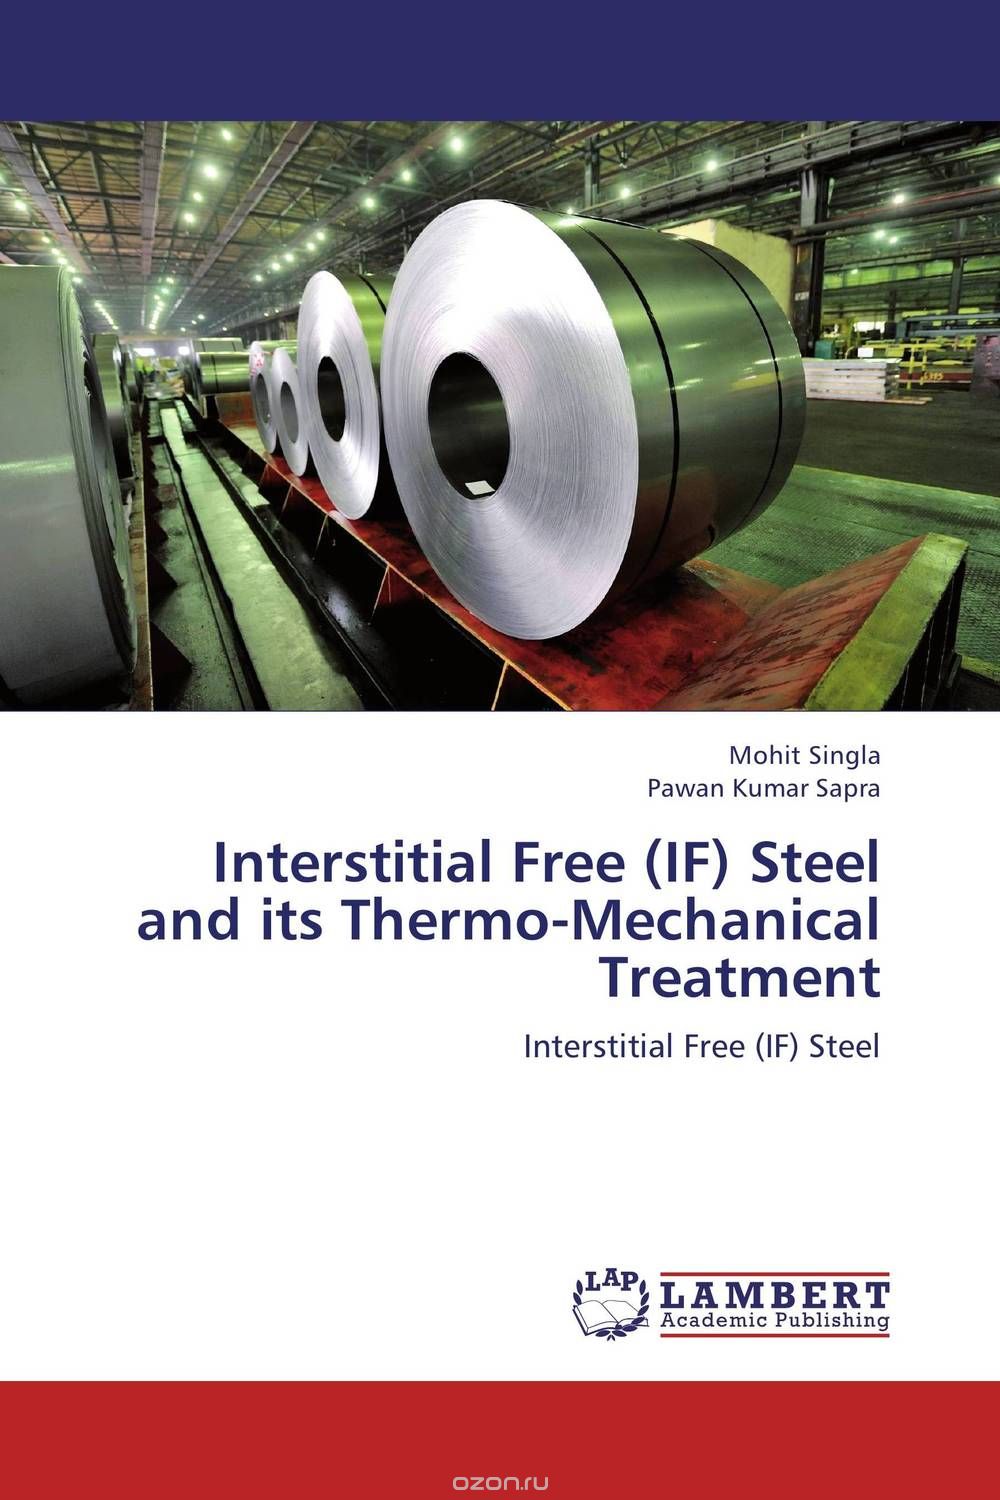 Interstitial Free (IF) Steel and its Thermo-Mechanical Treatment